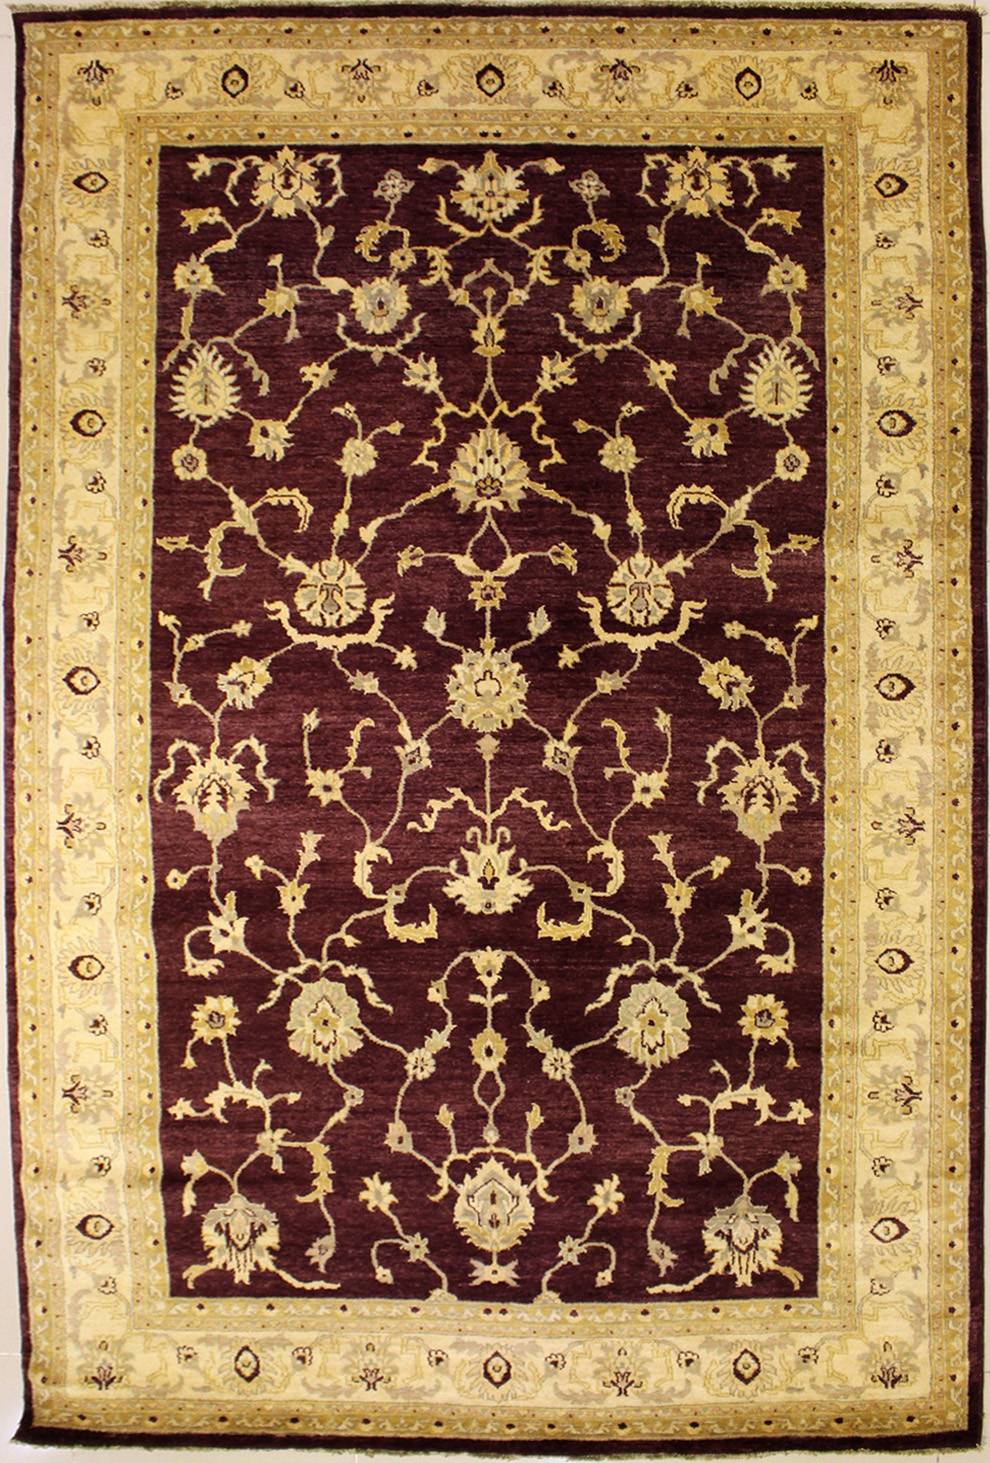 RugsTC 6'1 x 8'7 Chobi Ziegler Area Rug Made Using Vegetable Dyes with Wool Pile 100% Original Hand-Knotted in Black,Beige,Green Colors a 6x9 Rectangular Double Knot Rug 